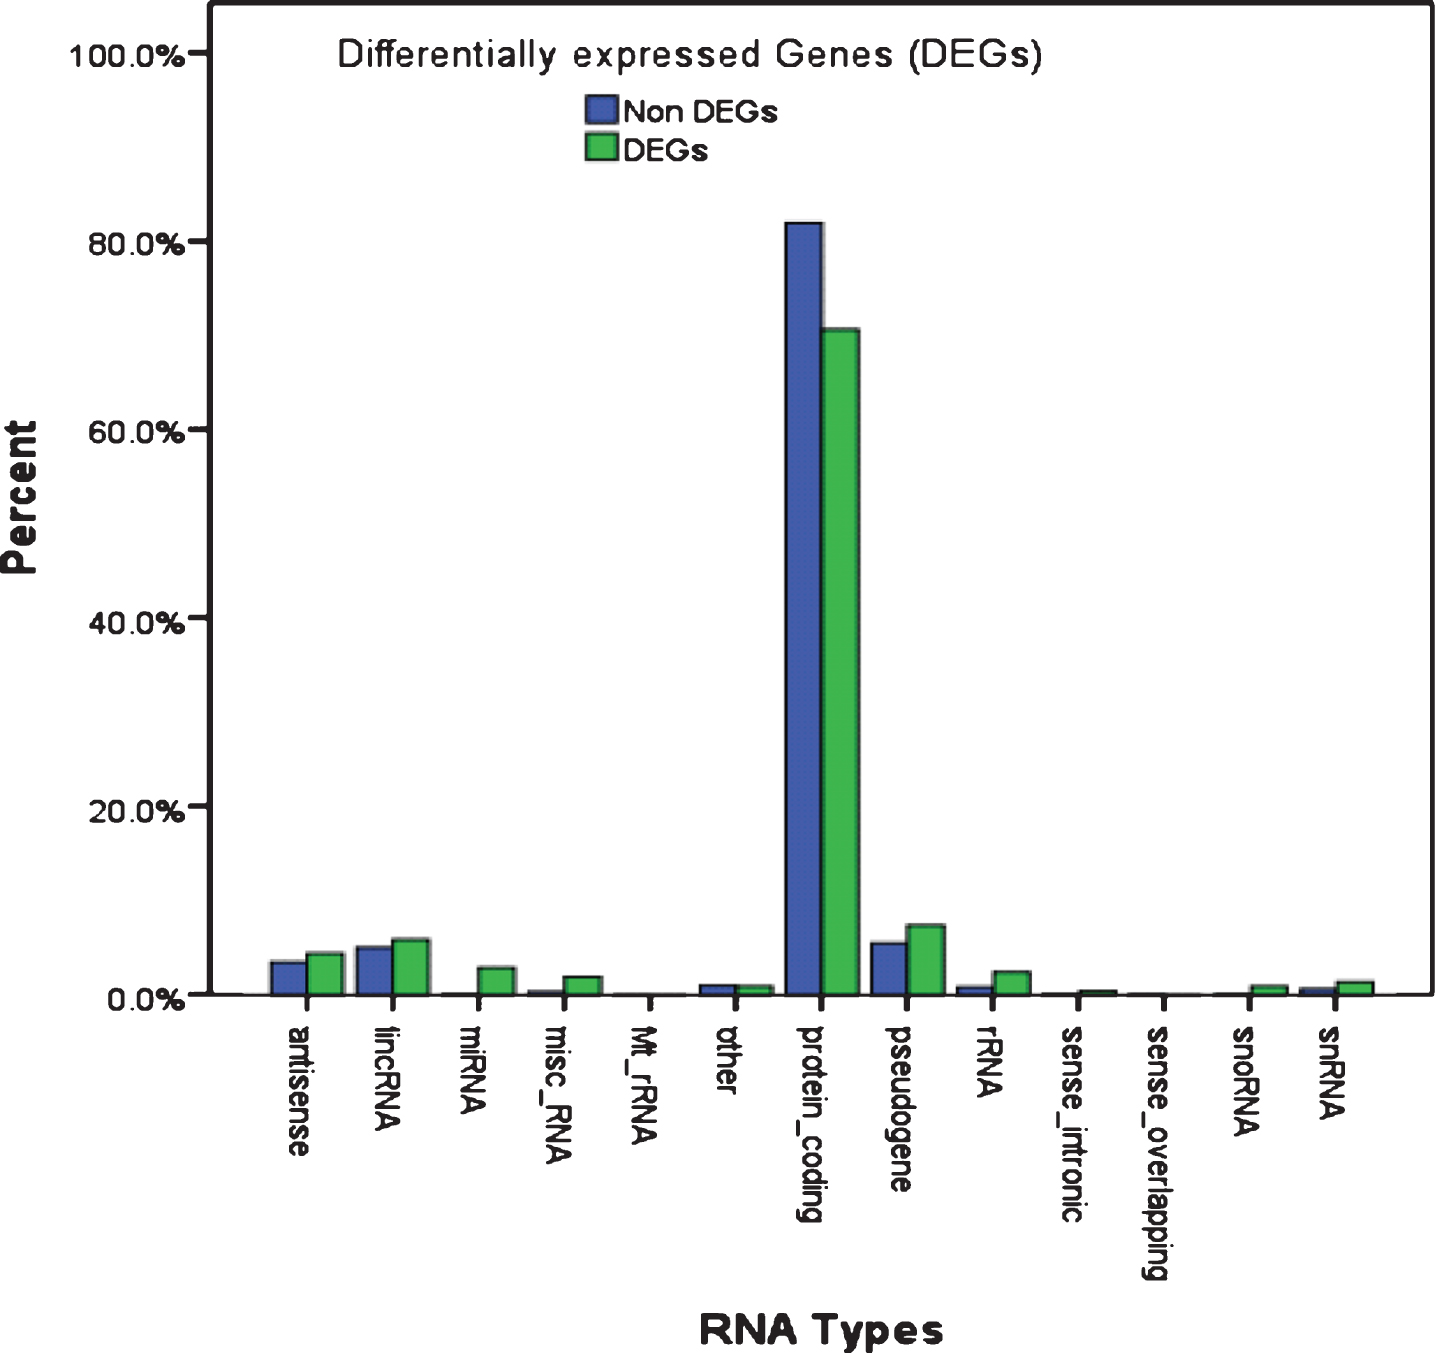 Comparison of the abundance of RNA species in differentially-expressed and non-differentially expressed genes. Various RNA types (x-axis) were plotted as a percentage showing the difference in abundance of each RNA species in the non-differentially expressed (blue) and differentially expressed (green) gene pools identified by RNA-seq in PD patients and controls using p <  0.05, FDR <0.1, and |log FC| >1 as cutoff criteria. DEGs had an overall higher proportion of non-coding RNA genes (29.4% vs 18.1% ; p = 0.001, relative risk = 1.8, 95% CI: 1.34–2.41) and lower proportion of protein-coding genes (70.6% vs 81.9%) than the non-DEGs. Also, DEGs had a higher proportion of miRNA genes (3% vs 0.2% ; p = 0.001, relative risk = 2.07, 95% CI: 1.08–3.97) compared to non-DEGs.